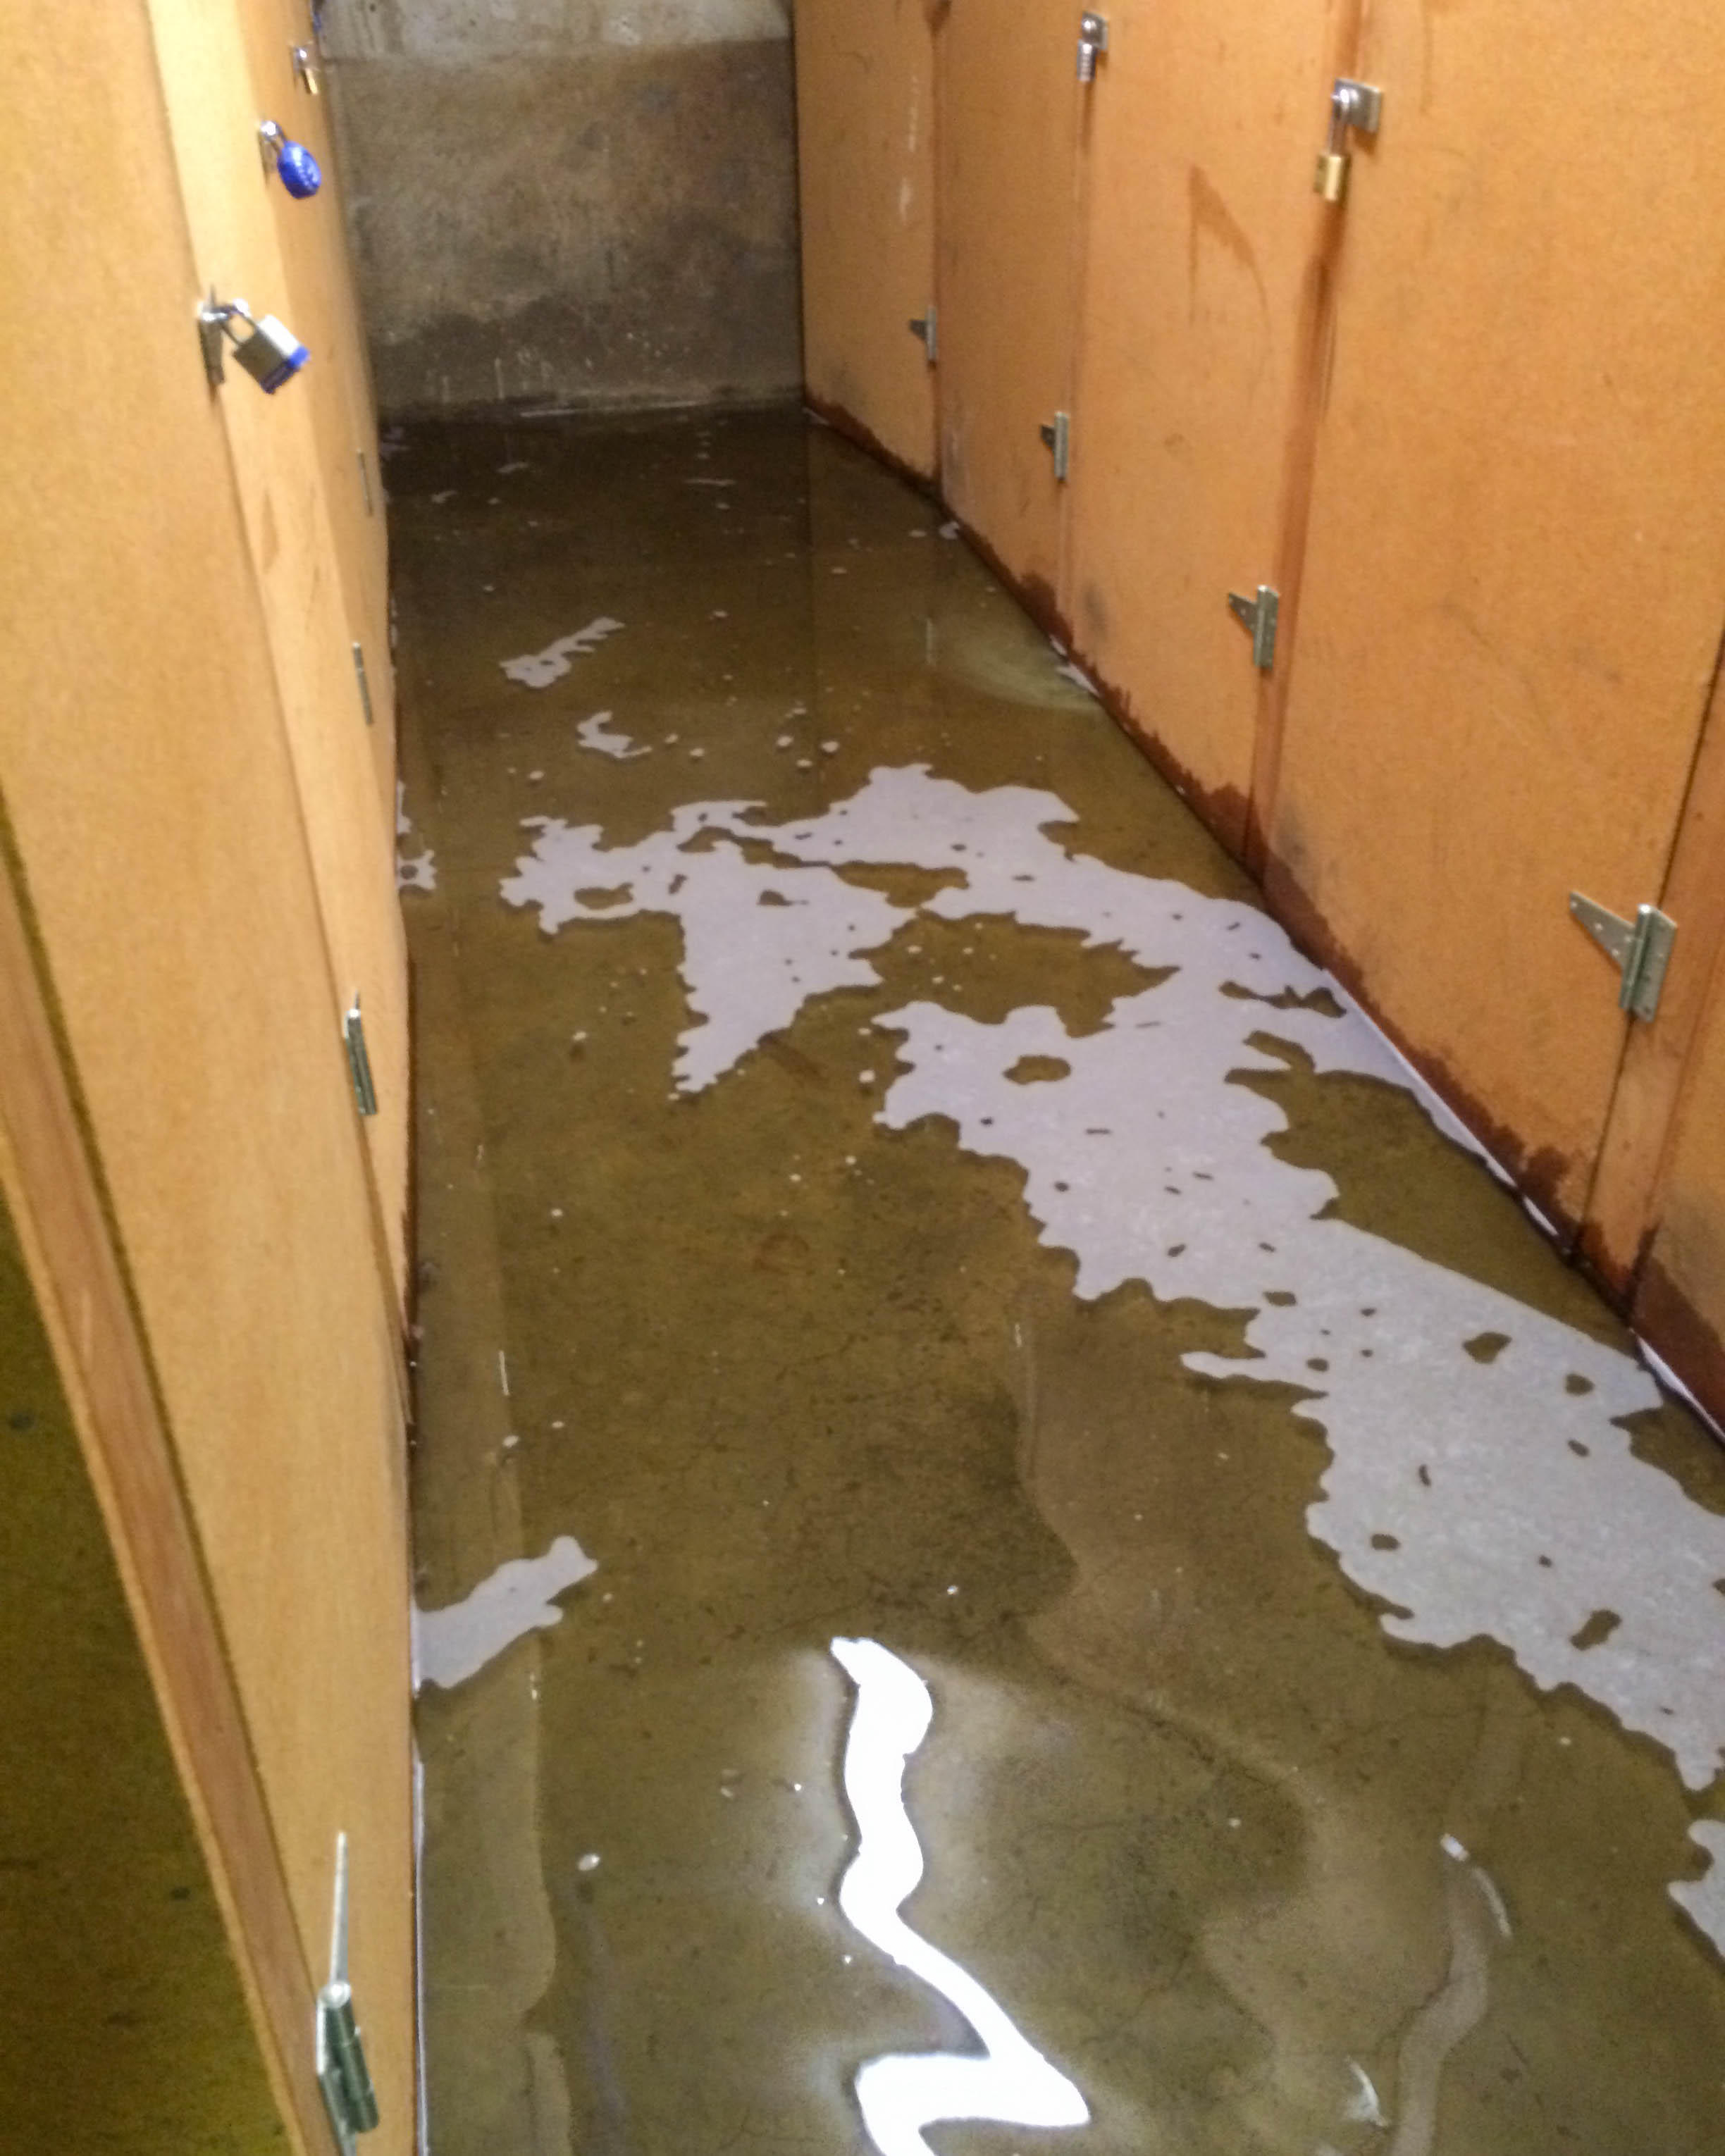 When water finds its way inside, call SERVPRO of East Bellevue. Our team is available 24/7, 365 to help when disaster strikes around your Bellevue, WA area.